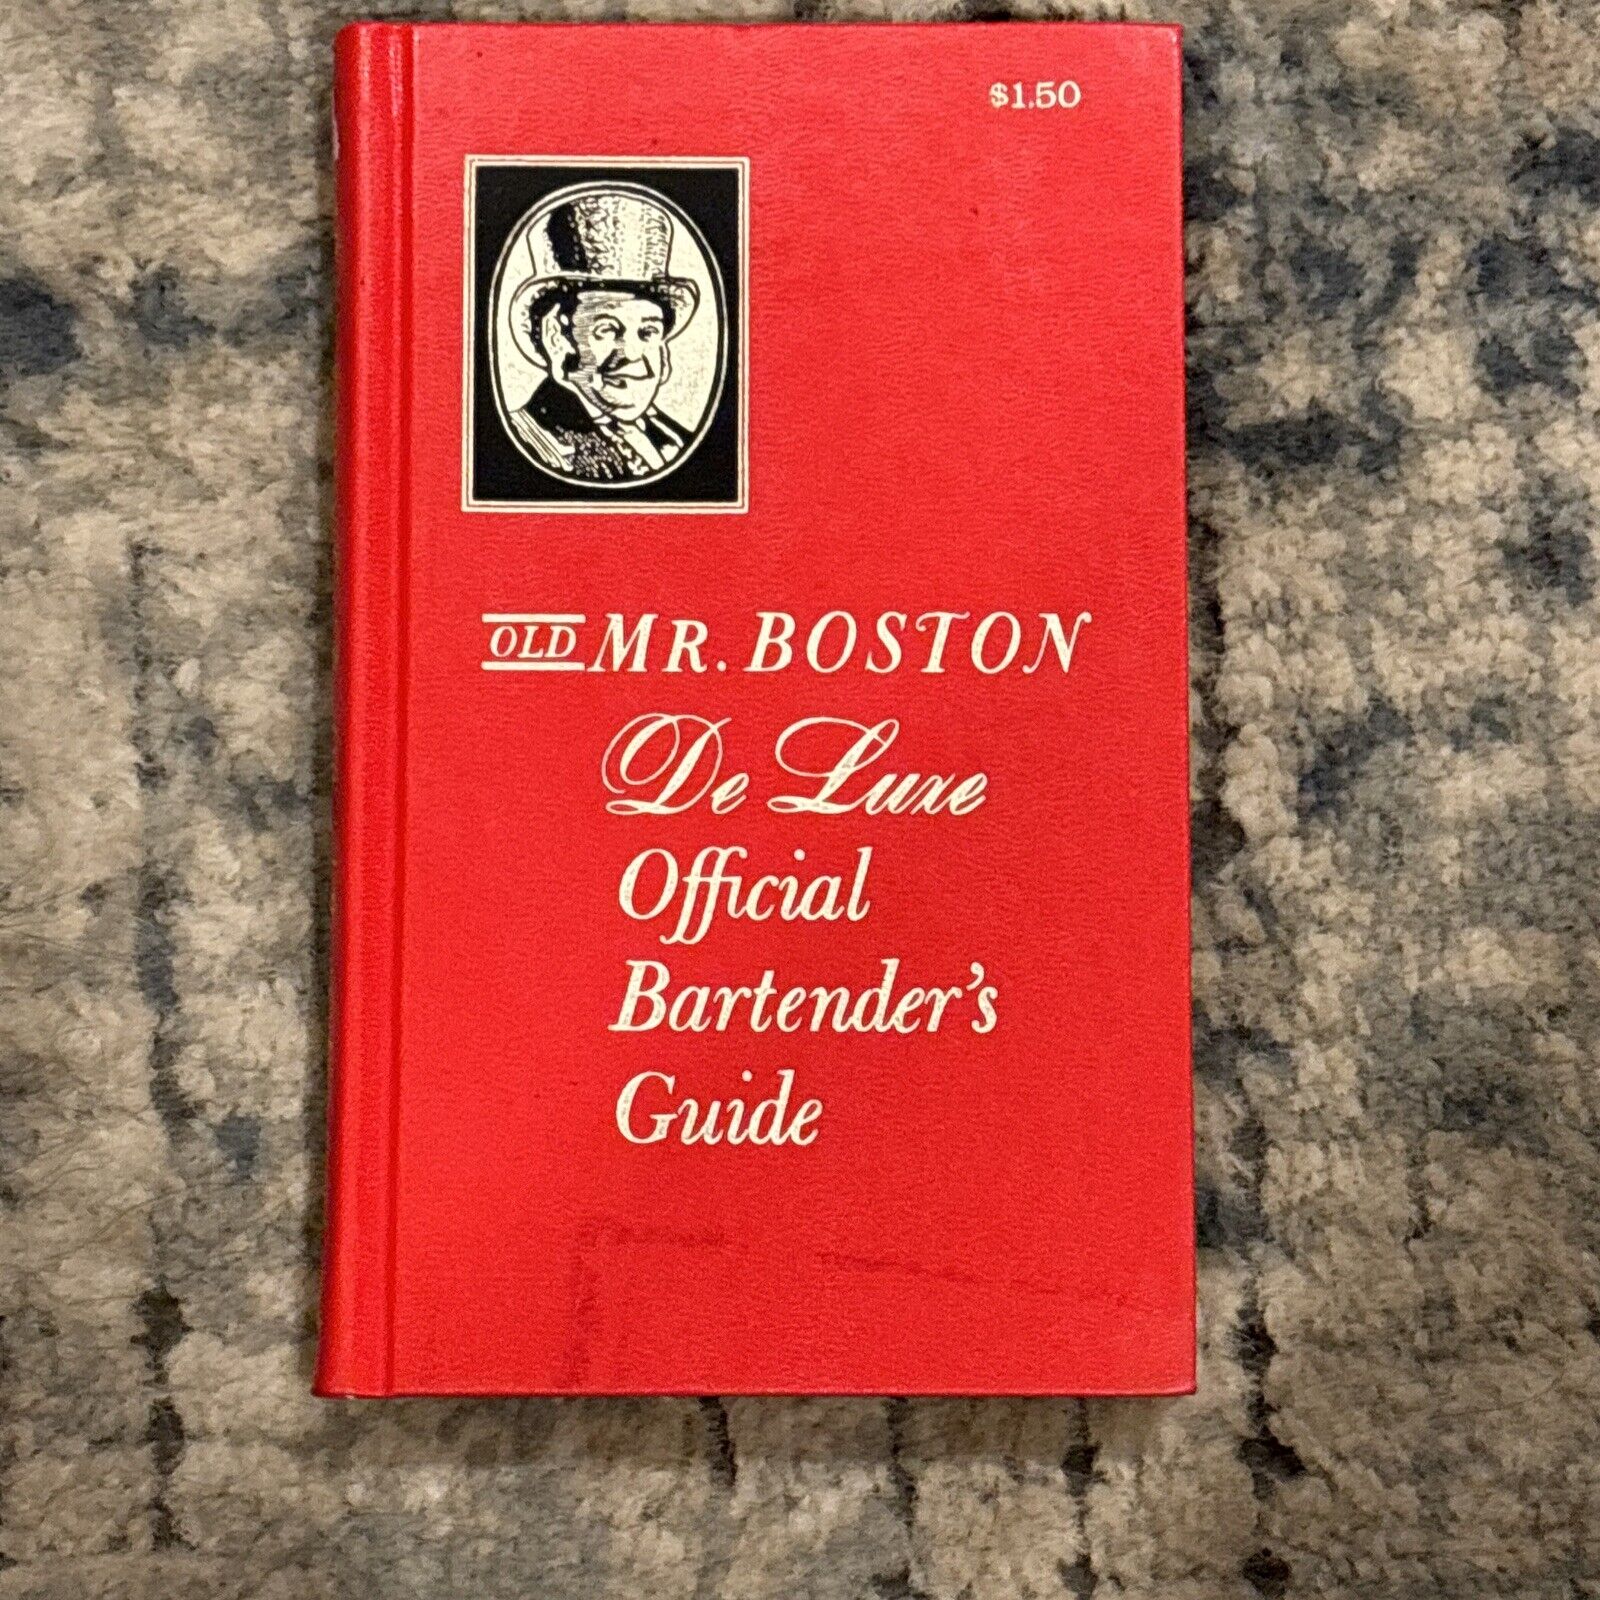 Old Mr Boston Deluxe Official Bartenders Guide 1972 Hardcover 52nd Printing